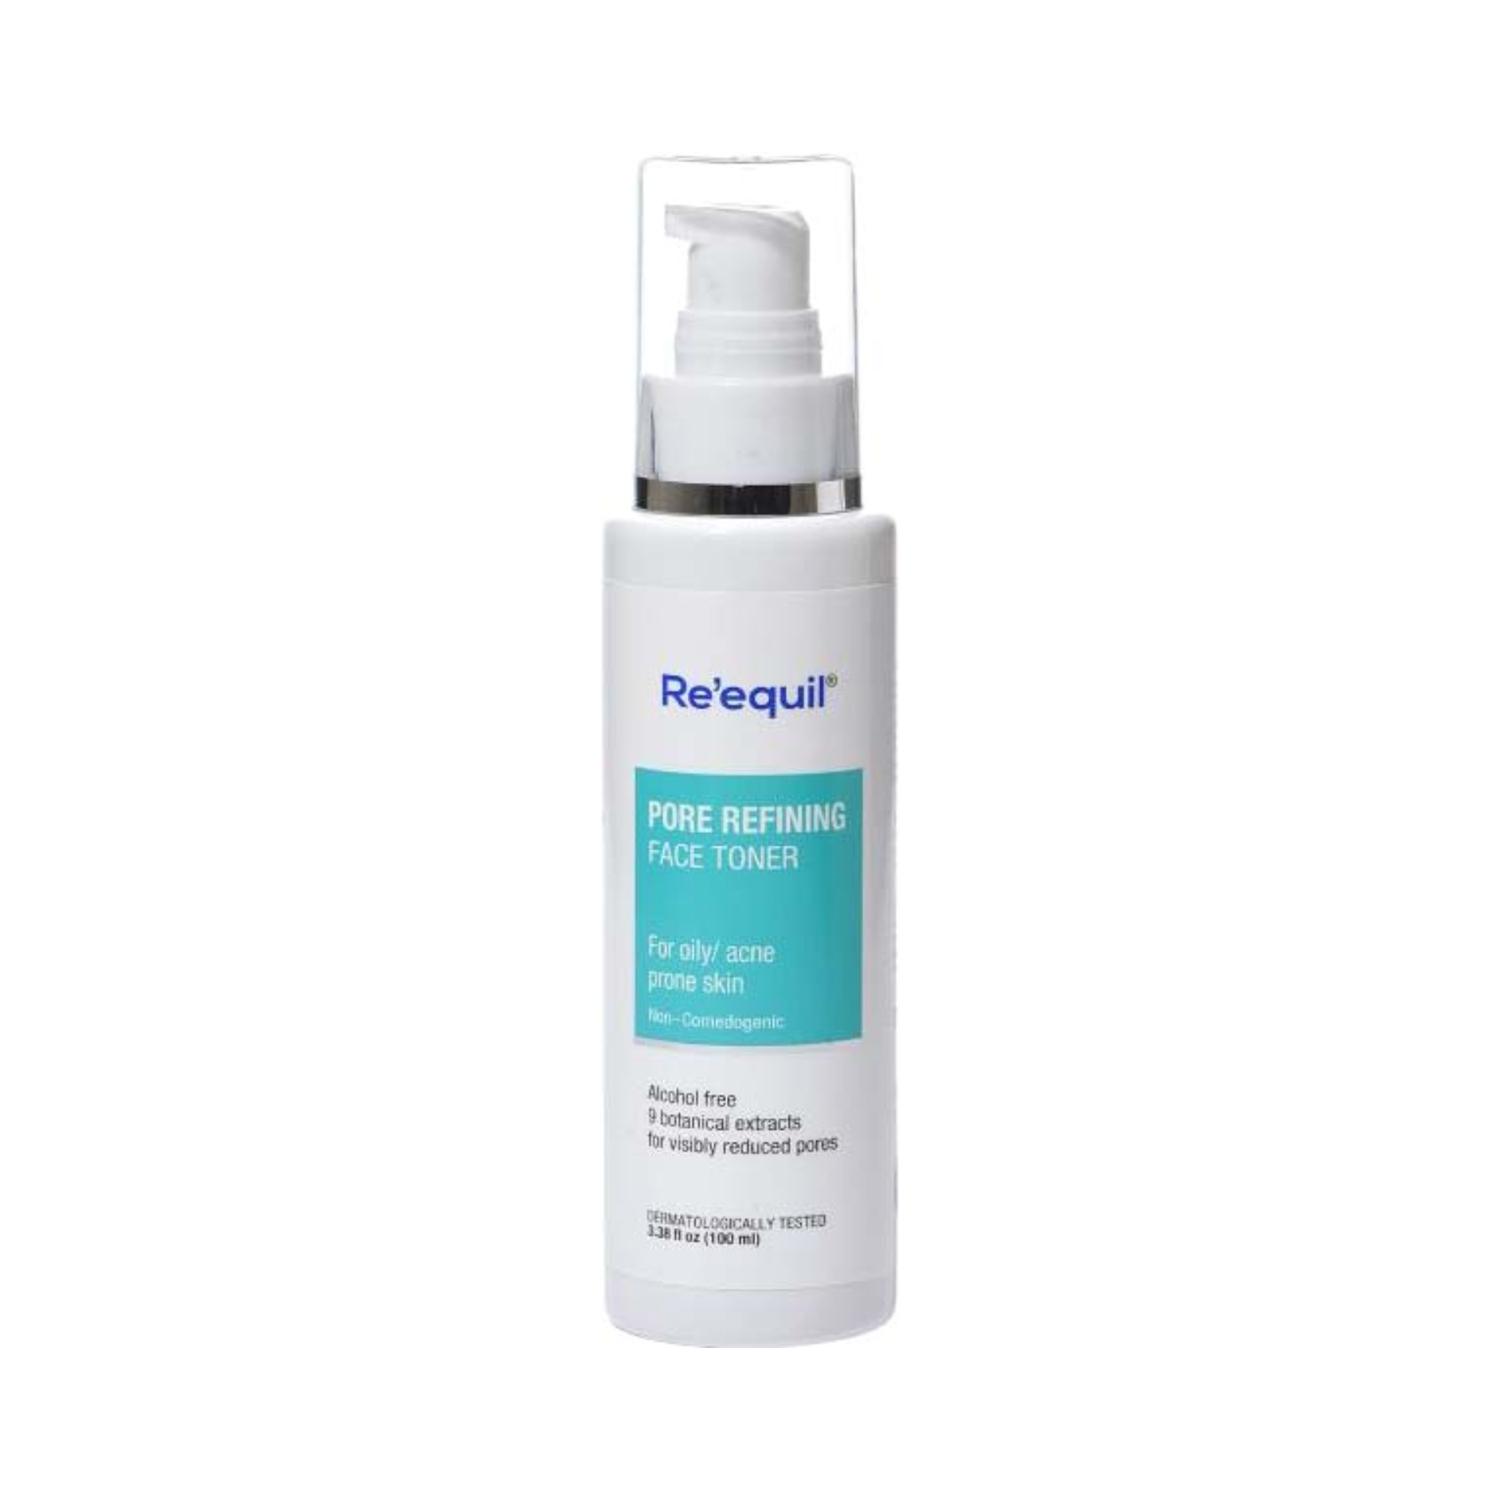 re'equil-pore-refining-face-toner-(100ml)